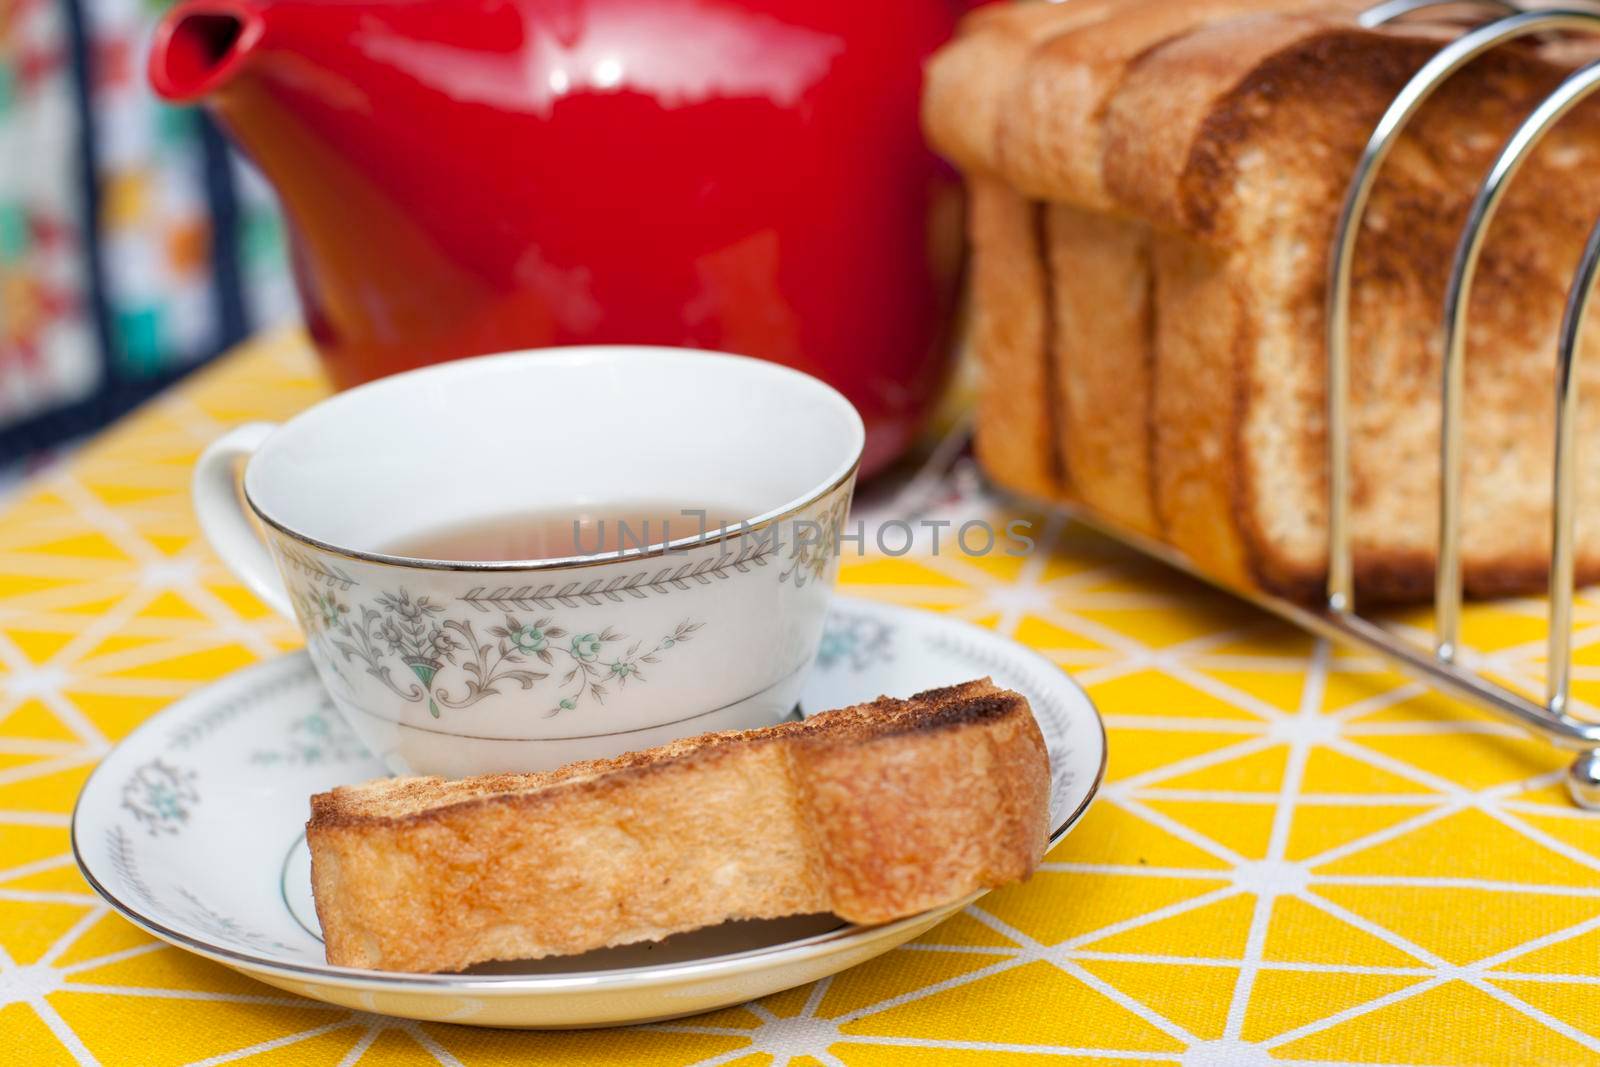 A red teapot with a cup and saucer and toasted bread